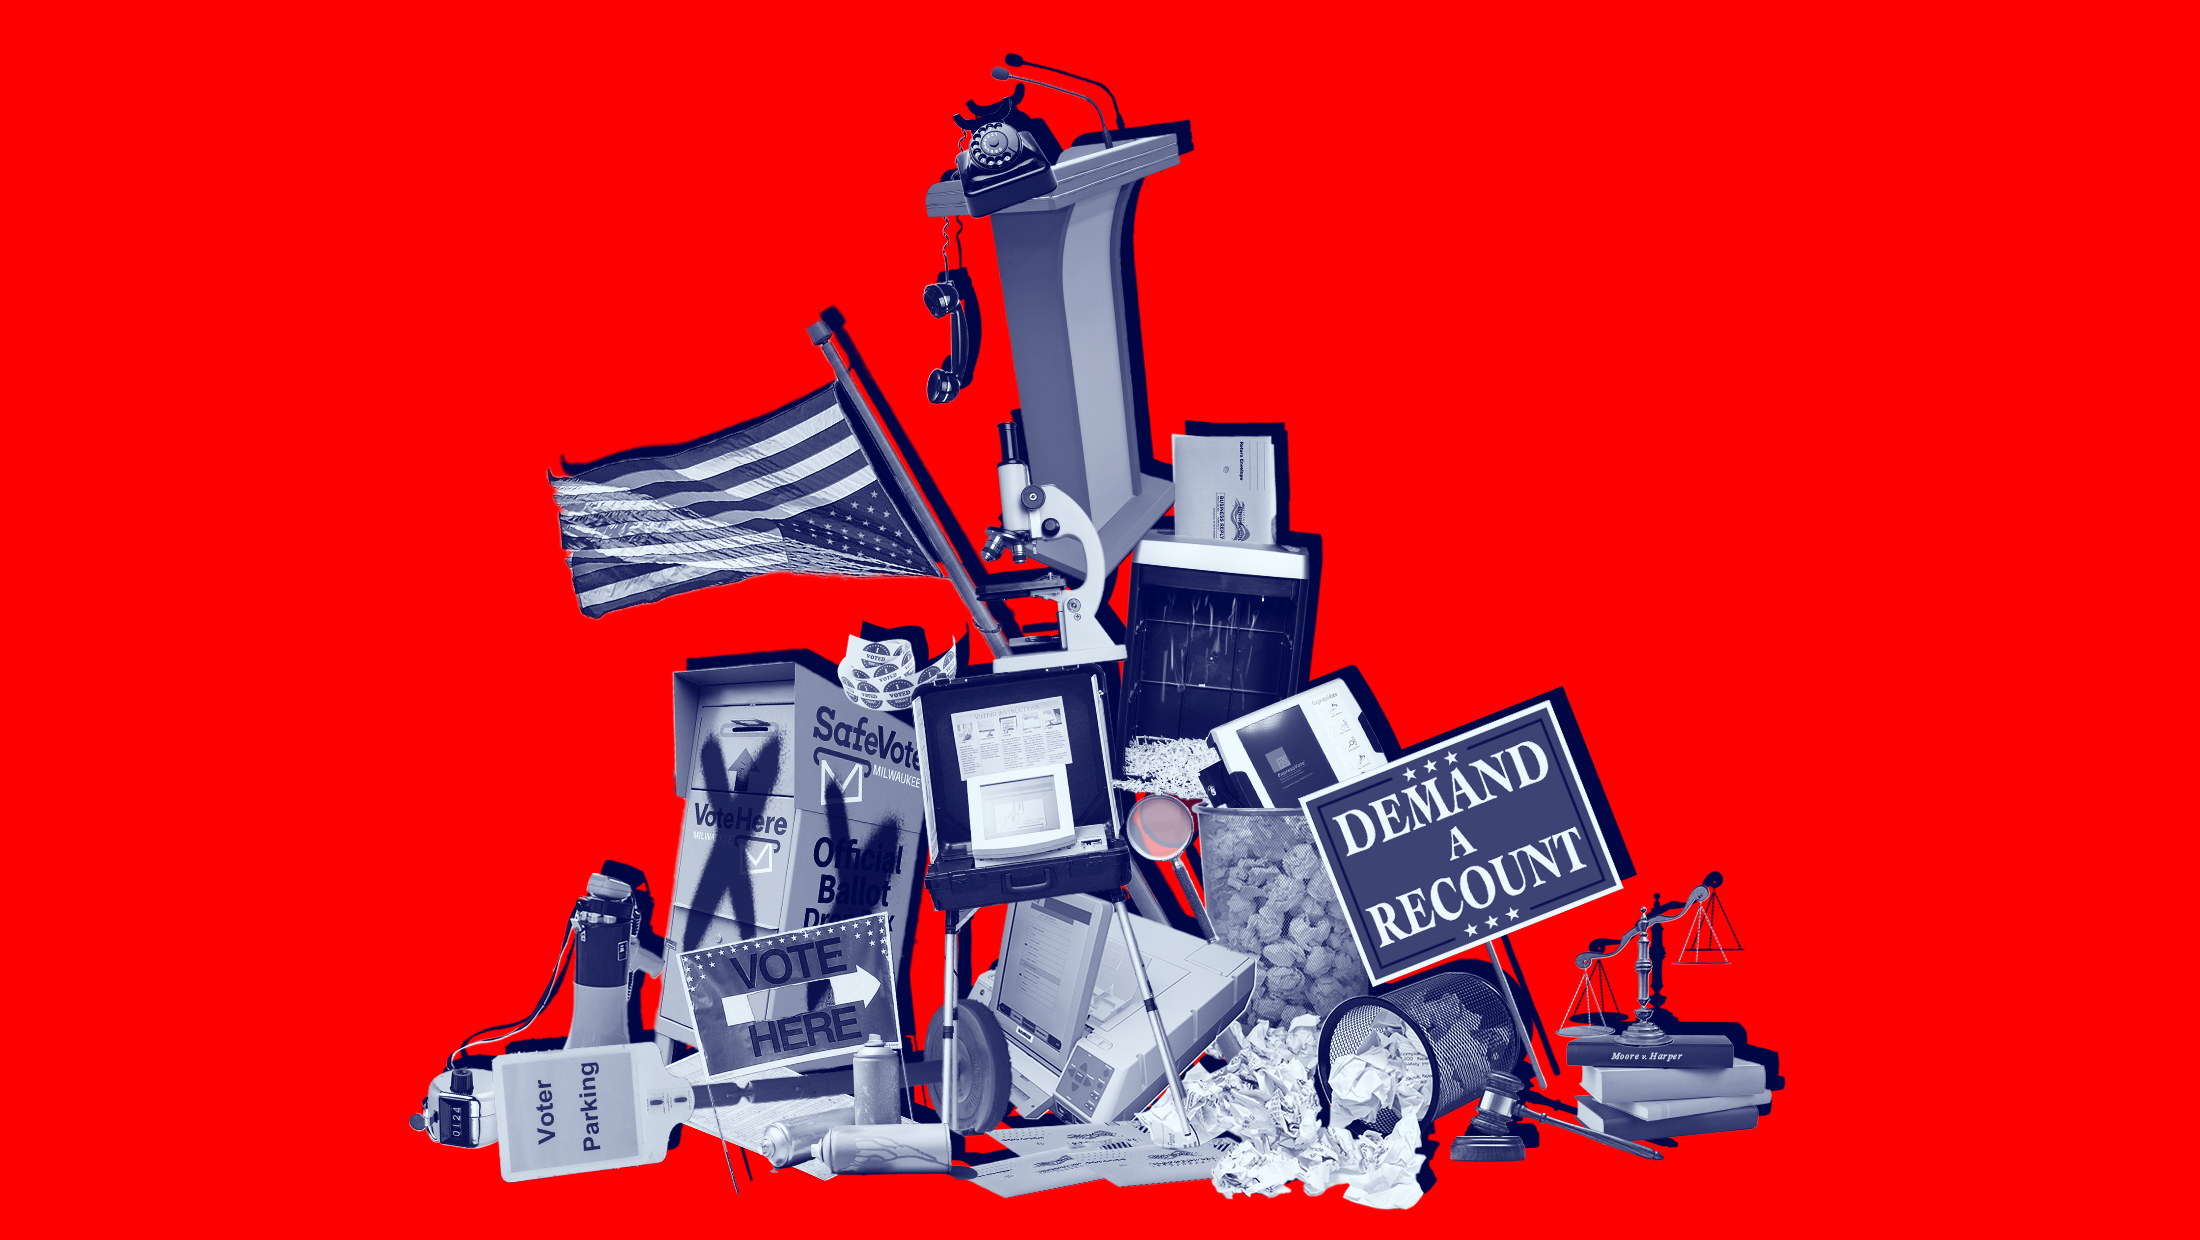 Red background with pile of voting-related images, such as a sign that reads "DEMAND A RECOUNT," a "VOTE HERE" sign, a ballot drop box and more.